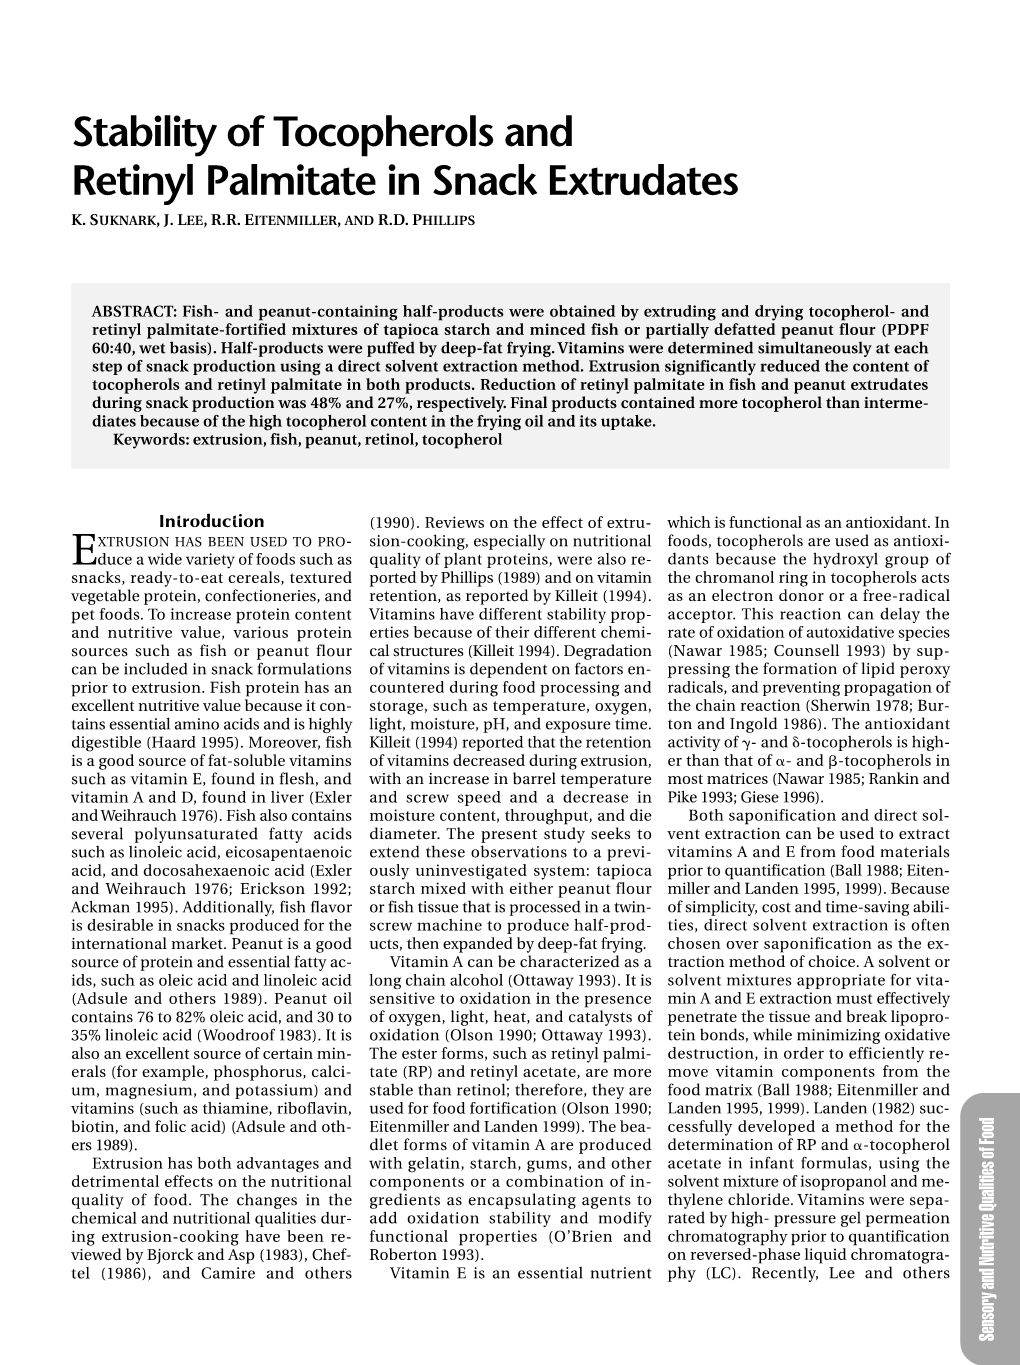 Stability of Tocopherols and Retinyl Palmitate In